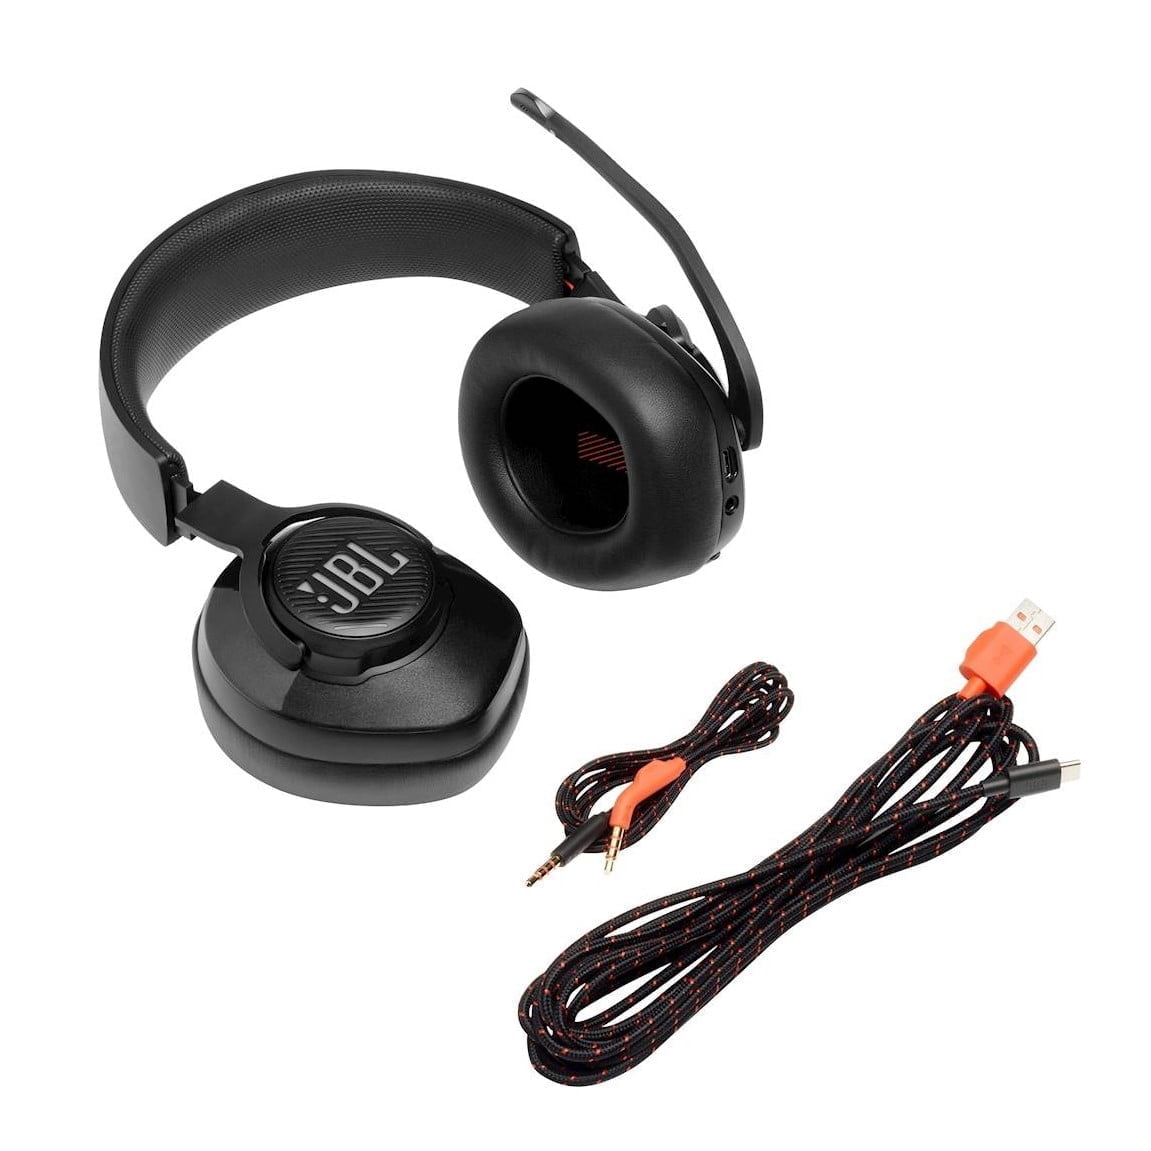 6408569Cv13D Jbl &Lt;H1&Gt;Jbl Quantum 200 Wired Over-Ear Gaming Headset With Flip-Up Mic&Lt;/H1&Gt; Https://Www.youtube.com/Watch?V=E3Fiycdl7De Turn Your Game Into An Epic Event. Featuring Jbl Quantumsound Signature, The Jbl Quantum 200 Headset Puts You Right In The Middle Of The Action. Immersive And Accurate, So That You Can Hear Even The Tiniest Details, The Jbl Quantum 200 Equips You With All You Need To Own Every Battle. Jbl Quantum Jbl Quantum 200 Wired Over-Ear Gaming Headset With Flip-Up Mic